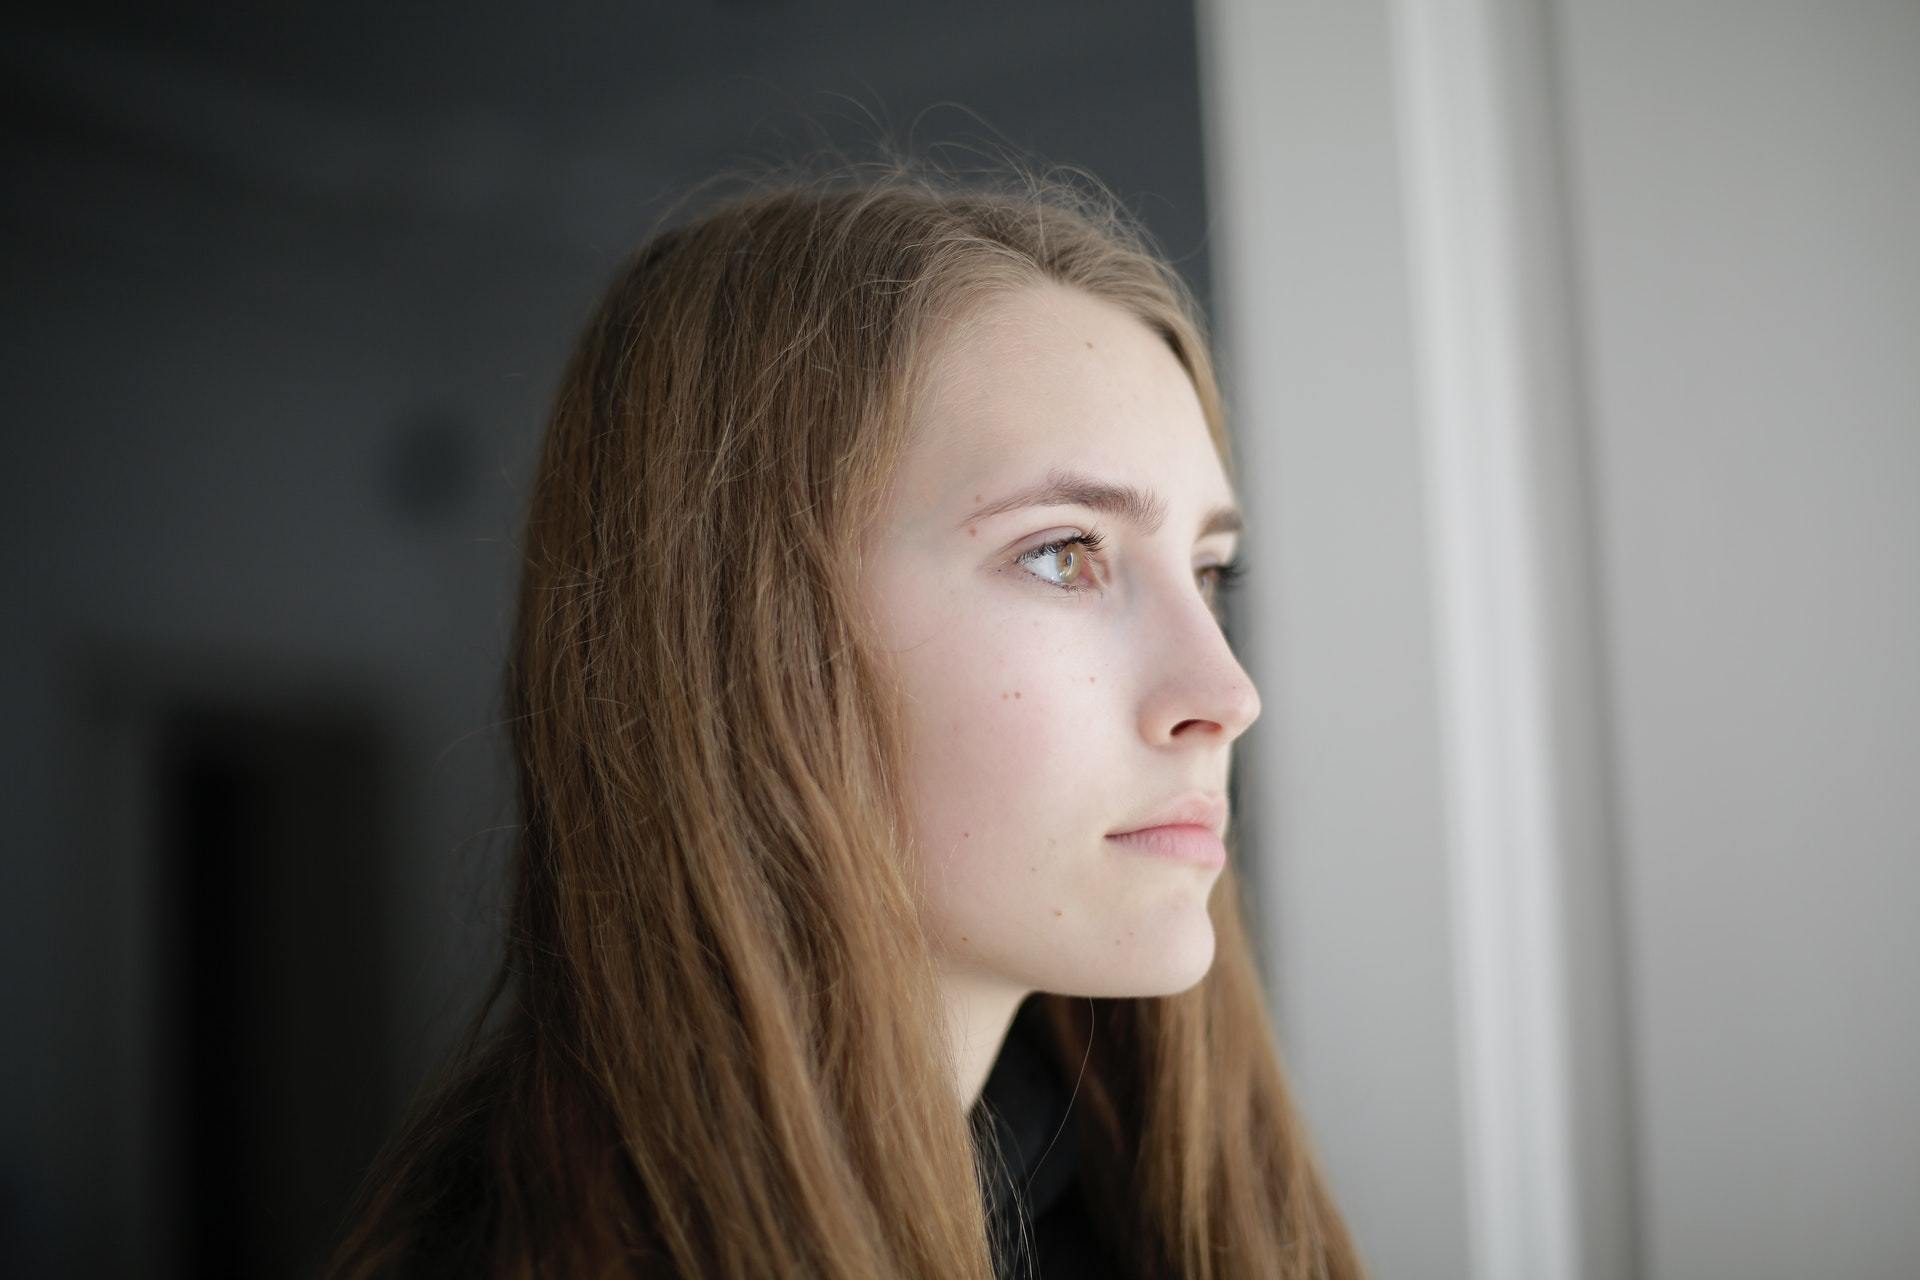 Woman Looking Out The Window - Hearing Aid Alternatives